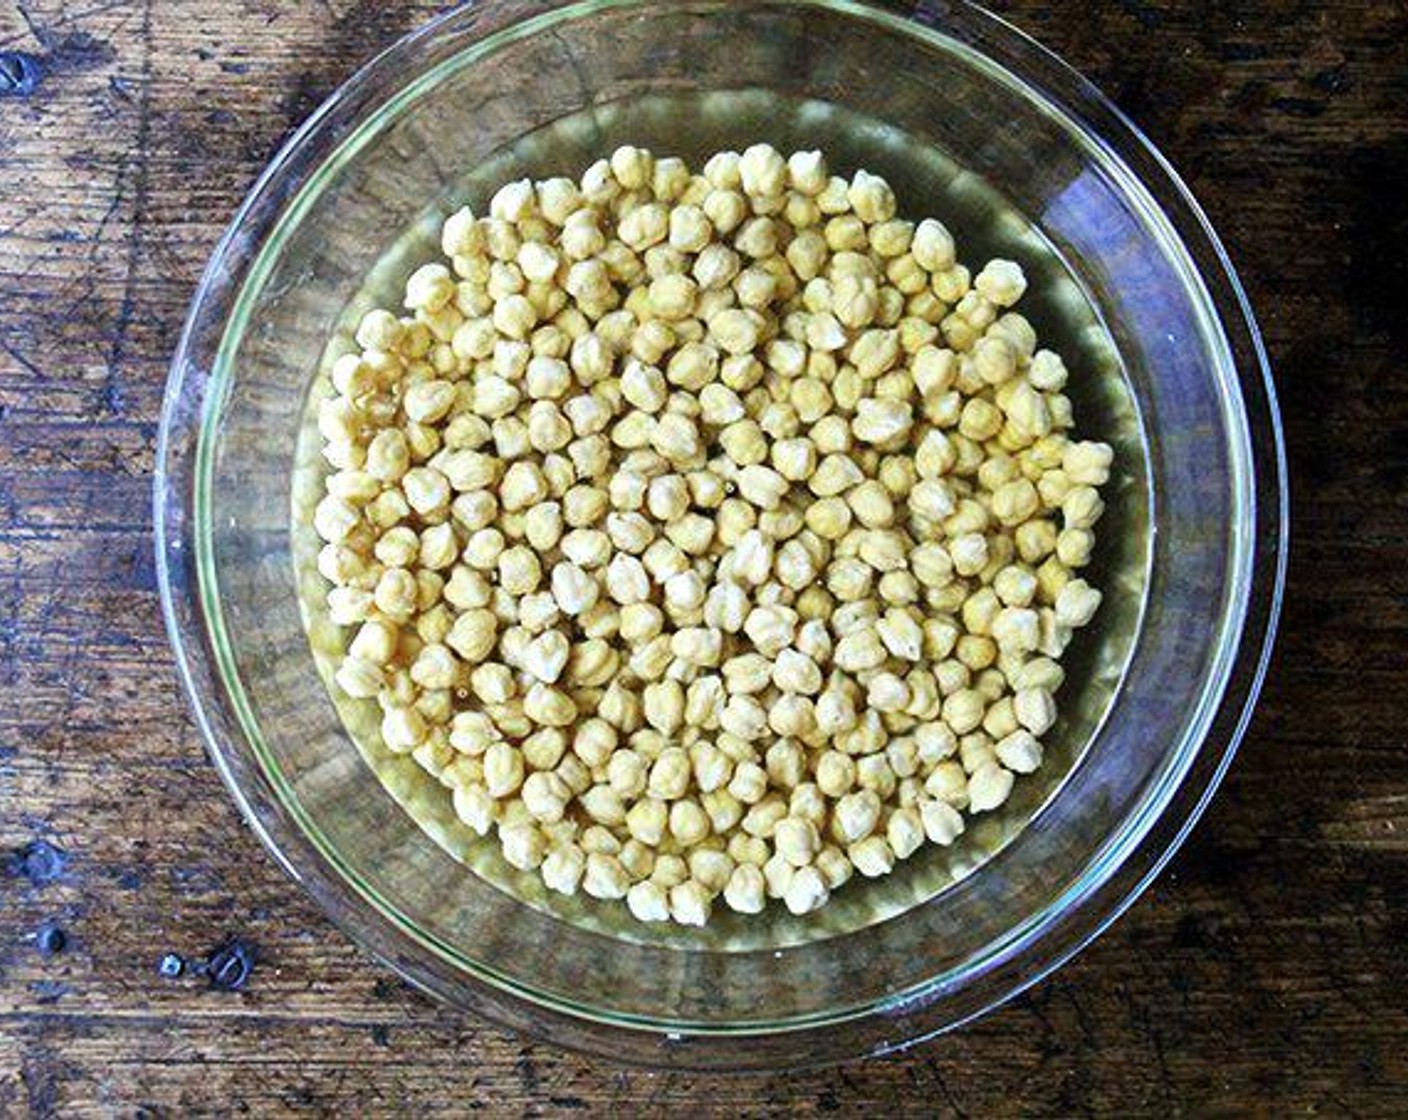 step 1 Place the Dried Chickpeas (2 1/4 cups) in a large bowl and cover with water by at least 3 inches. Add the Kosher Salt (3 Tbsp) and stir to dissolve. Let sit at room temperature overnight or for 8-10 hours at least.